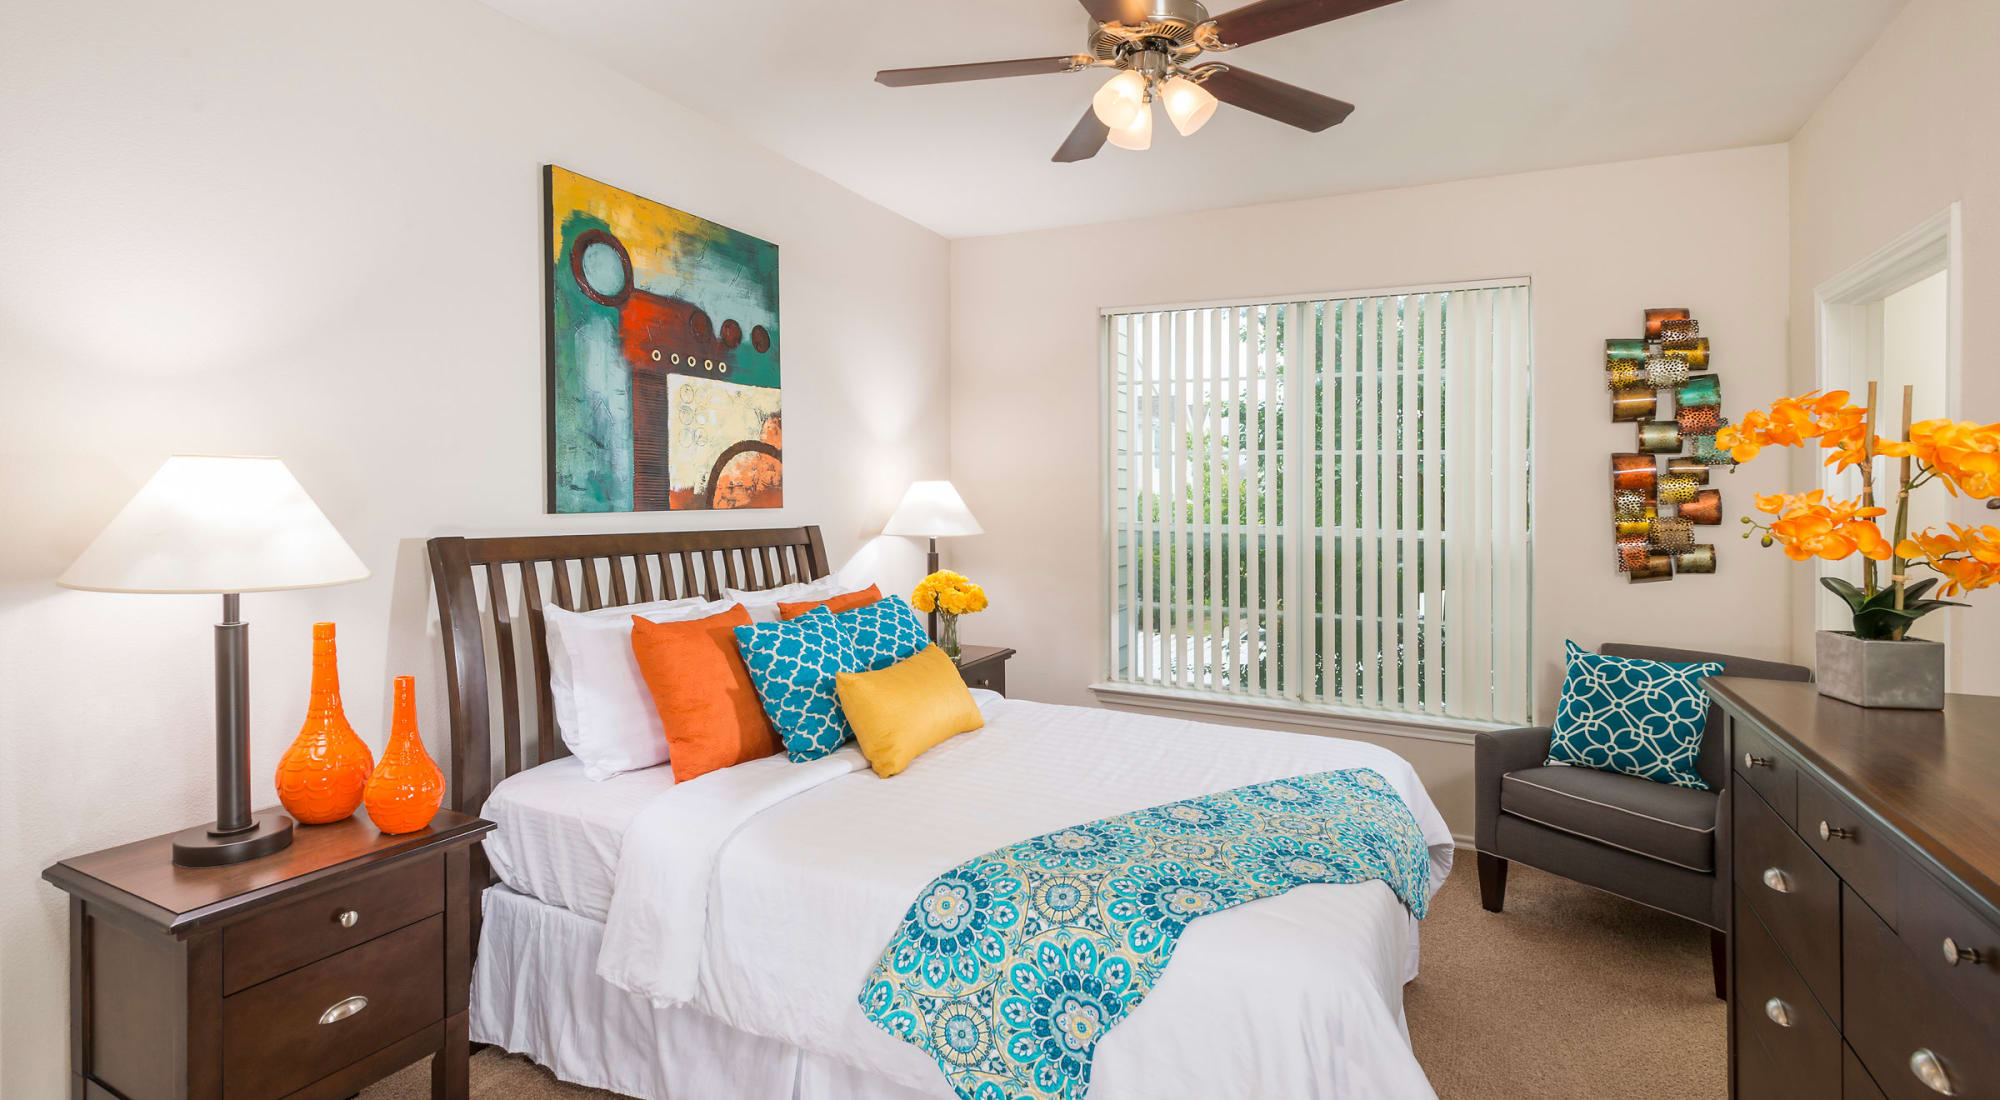 Cozy bedroom with ceiling fan at The Lodge at Westover Hills in San Antonio, Texas